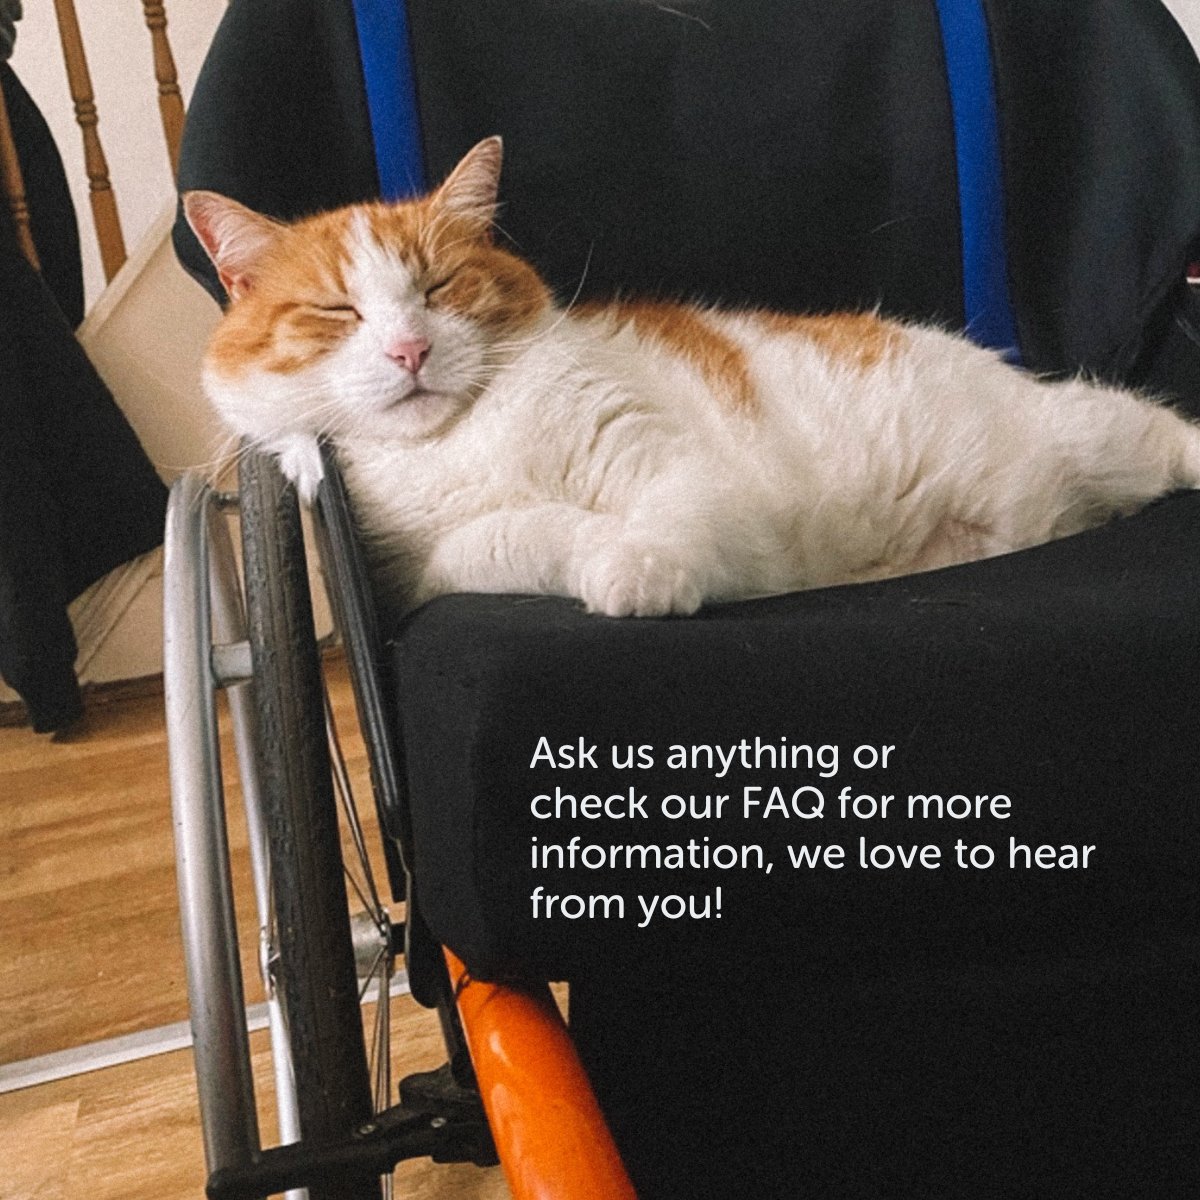 Got a question about Aerseat, our groundbreaking wheelchair overlay? Check out our FAQs section - if you can't find your answer, drop us a pm. 🔗 aergohealth.com/aerseat-faqs Alt text: Image 1 FAQ text, Image 2 Cat laying on wheelchair cushion.